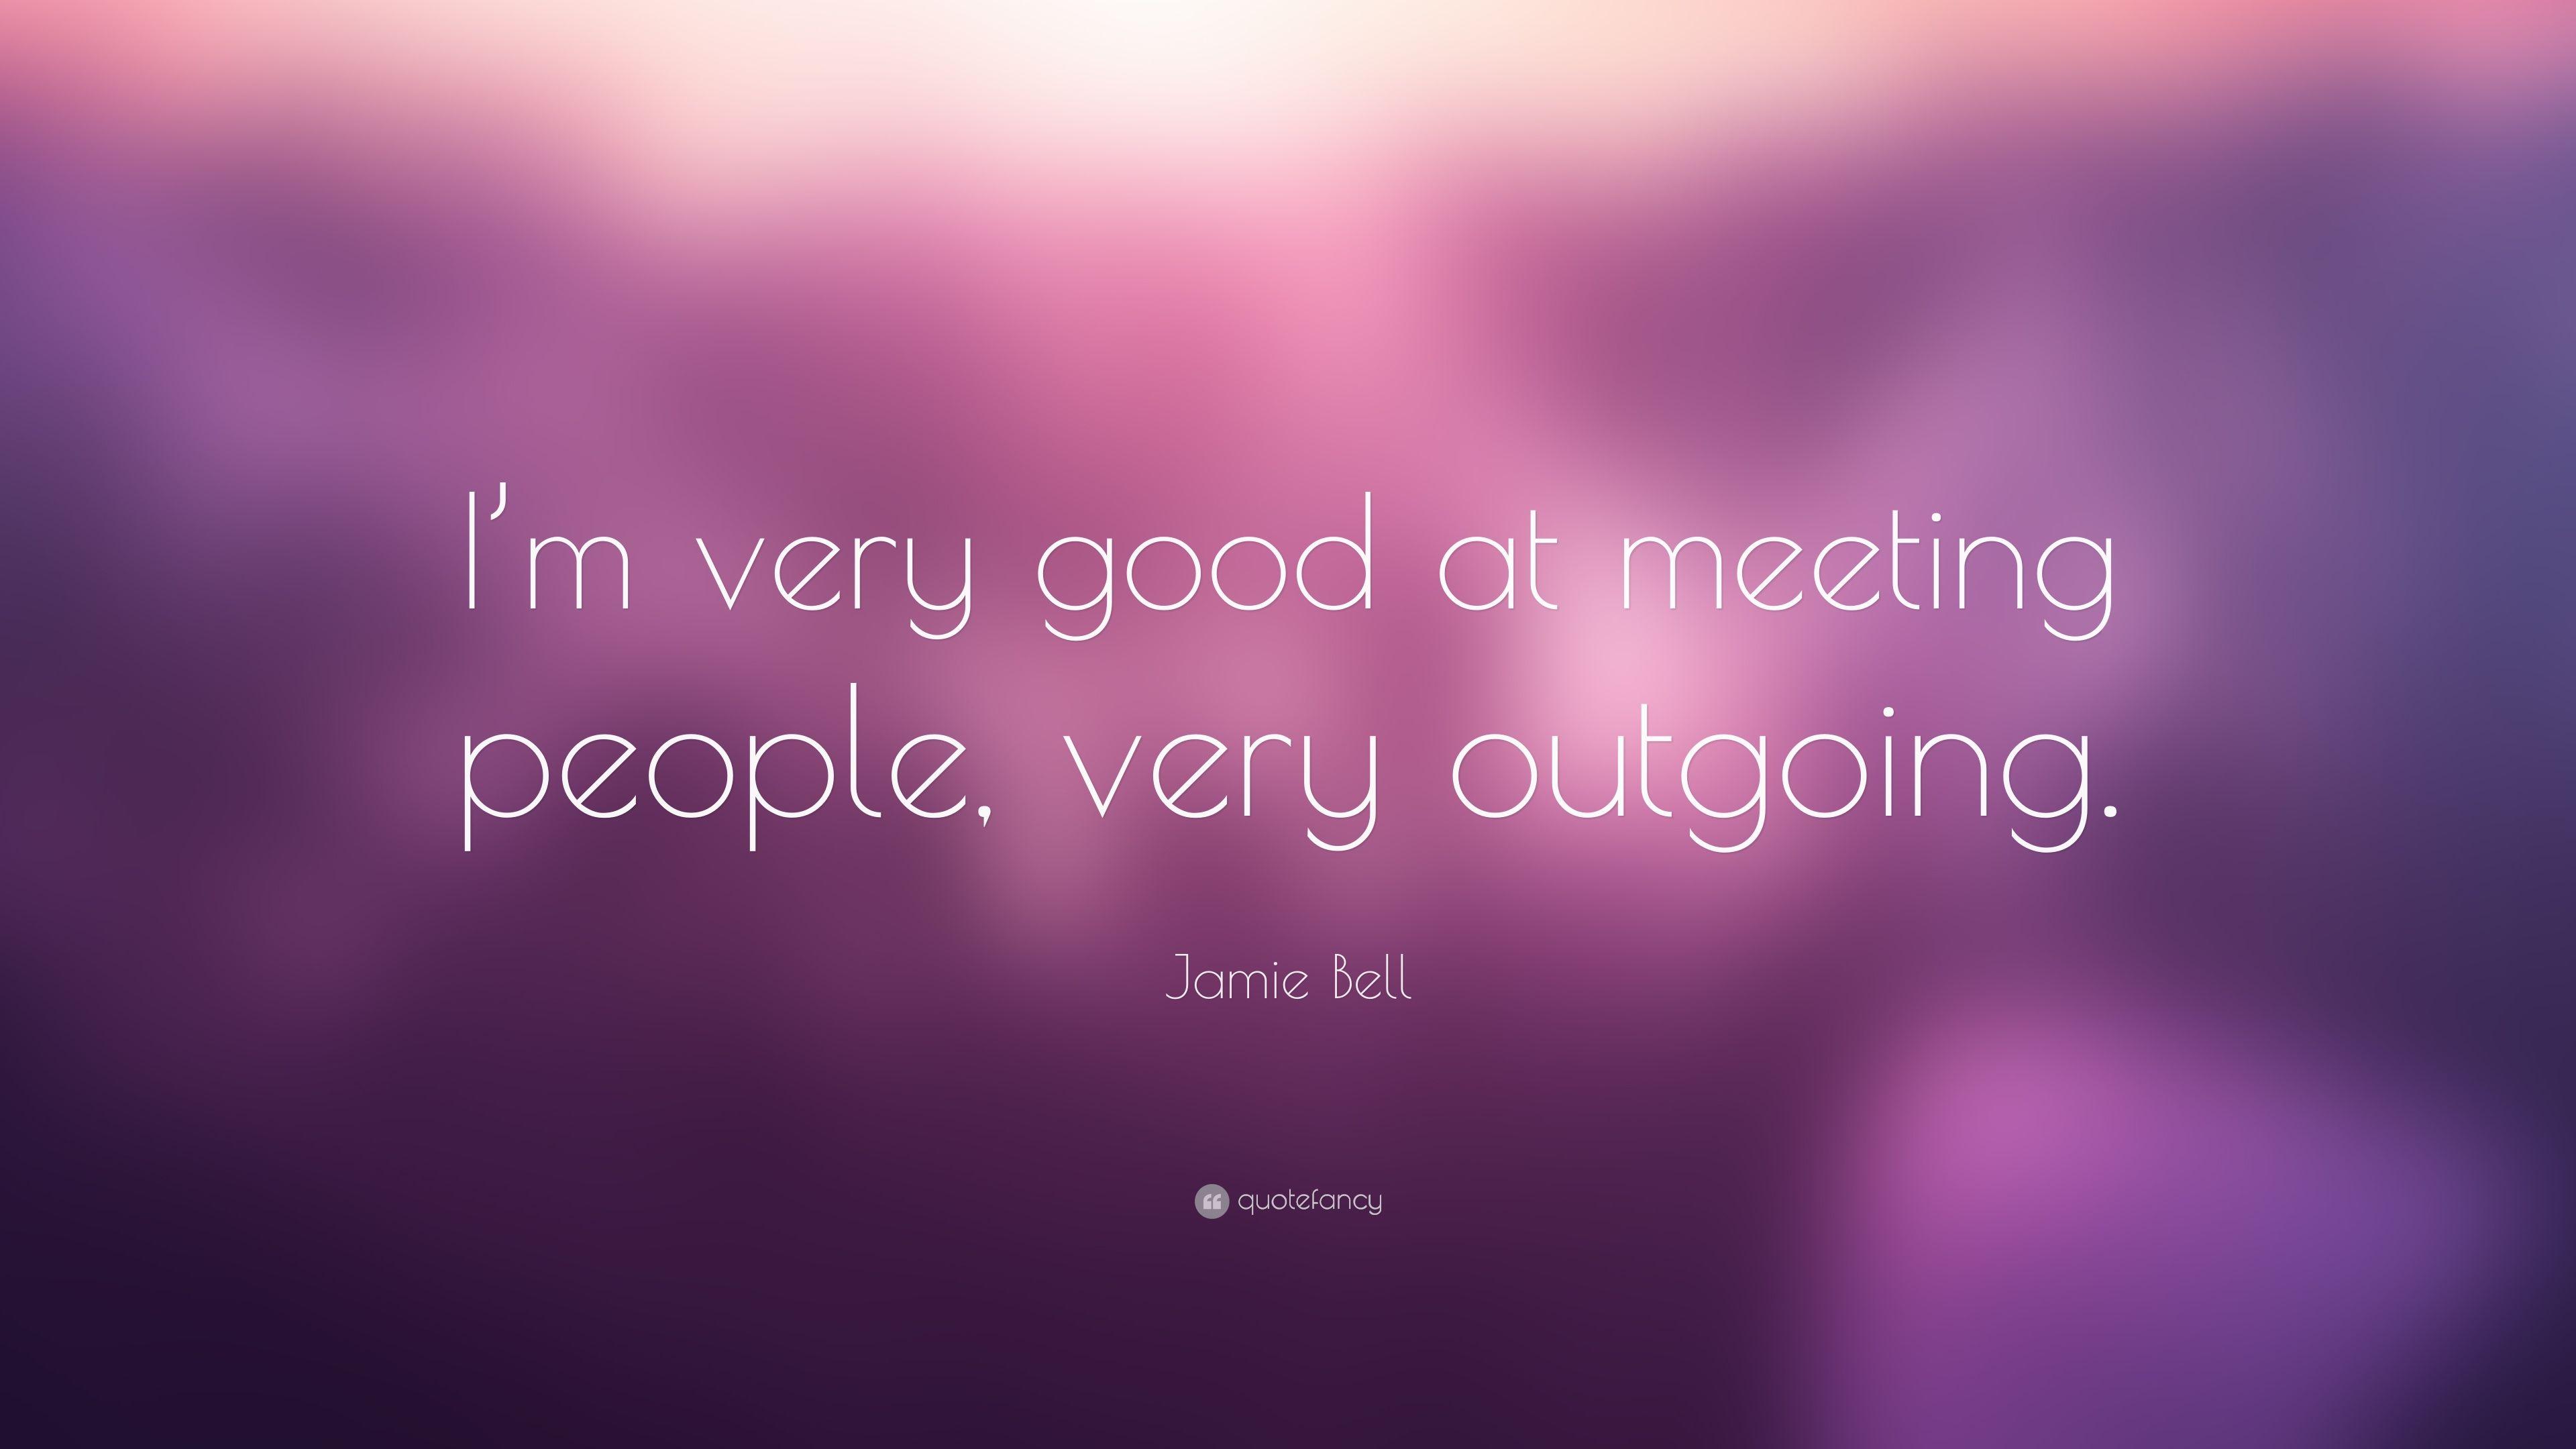 Jamie Bell Quote: “I'm very good at meeting people, very outgoing